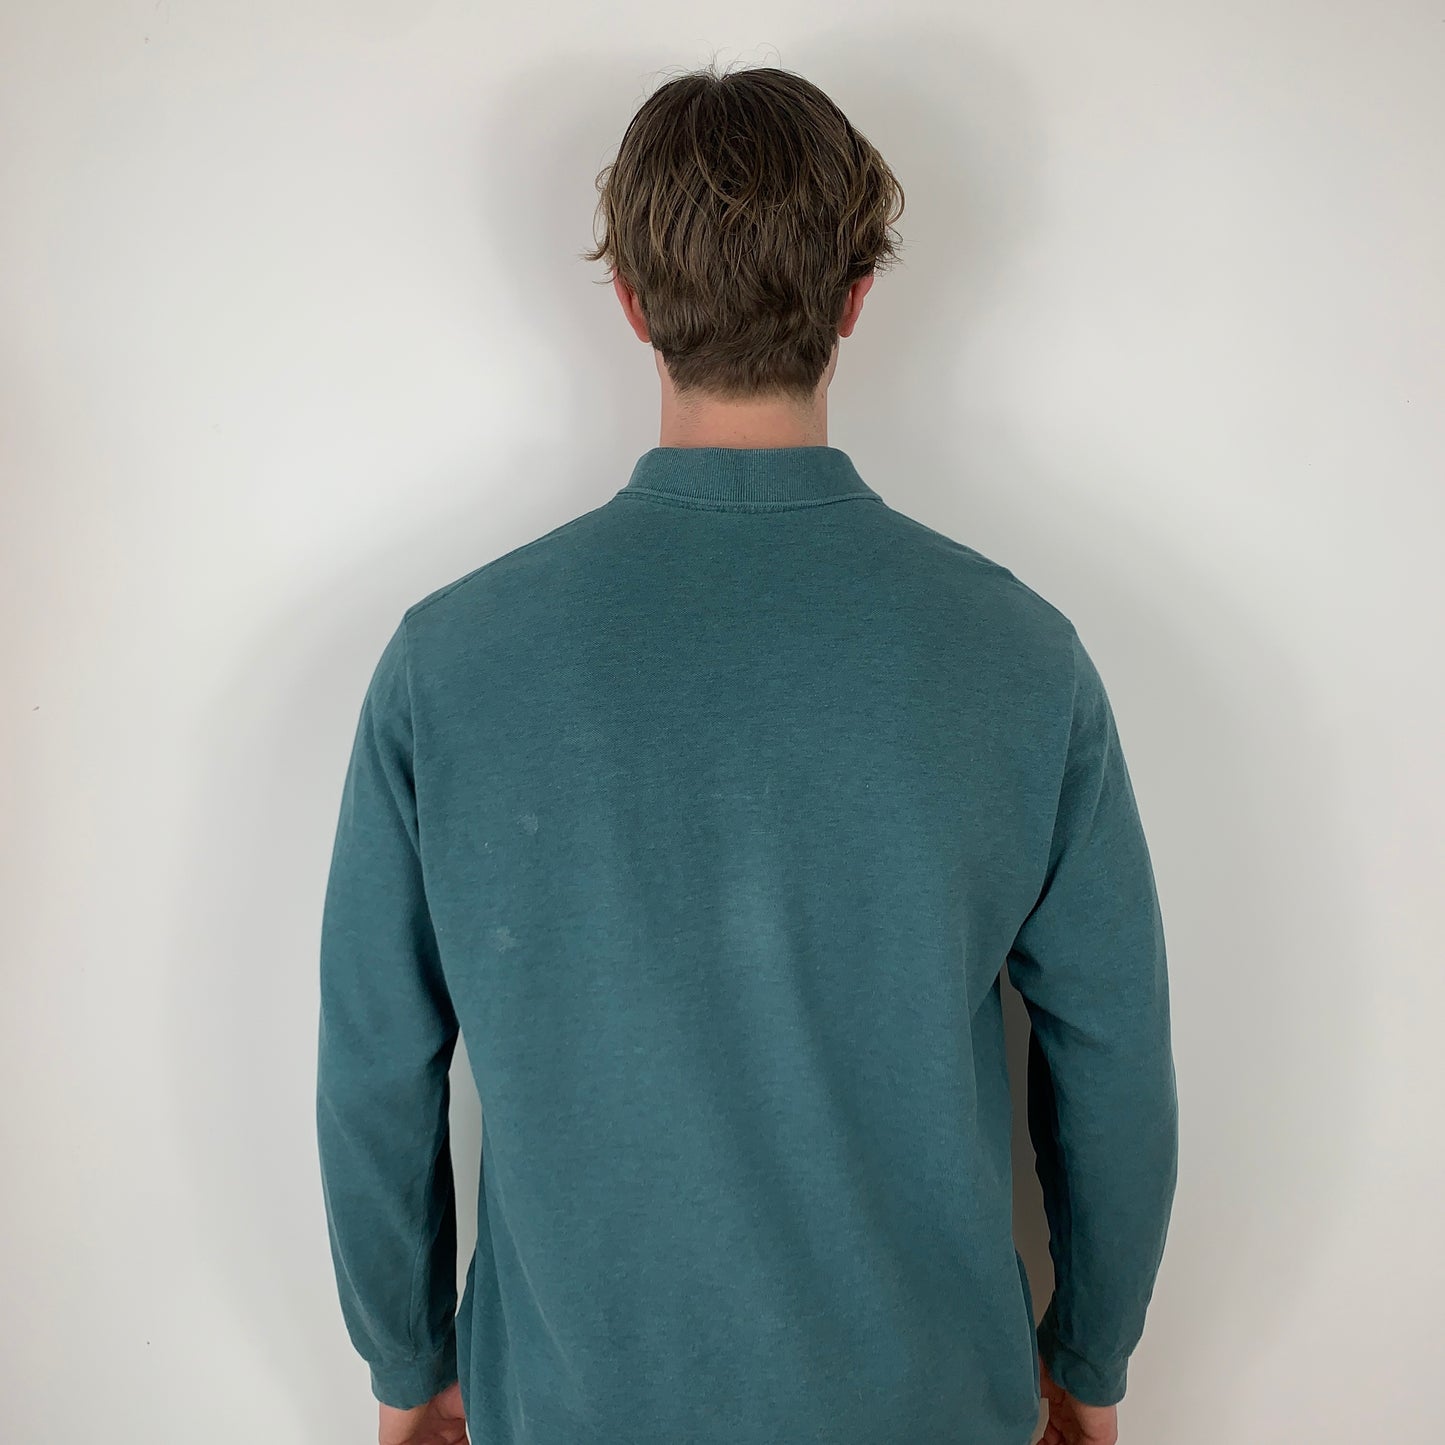 Lacoste Polo Long Sleeve "Turquoise"